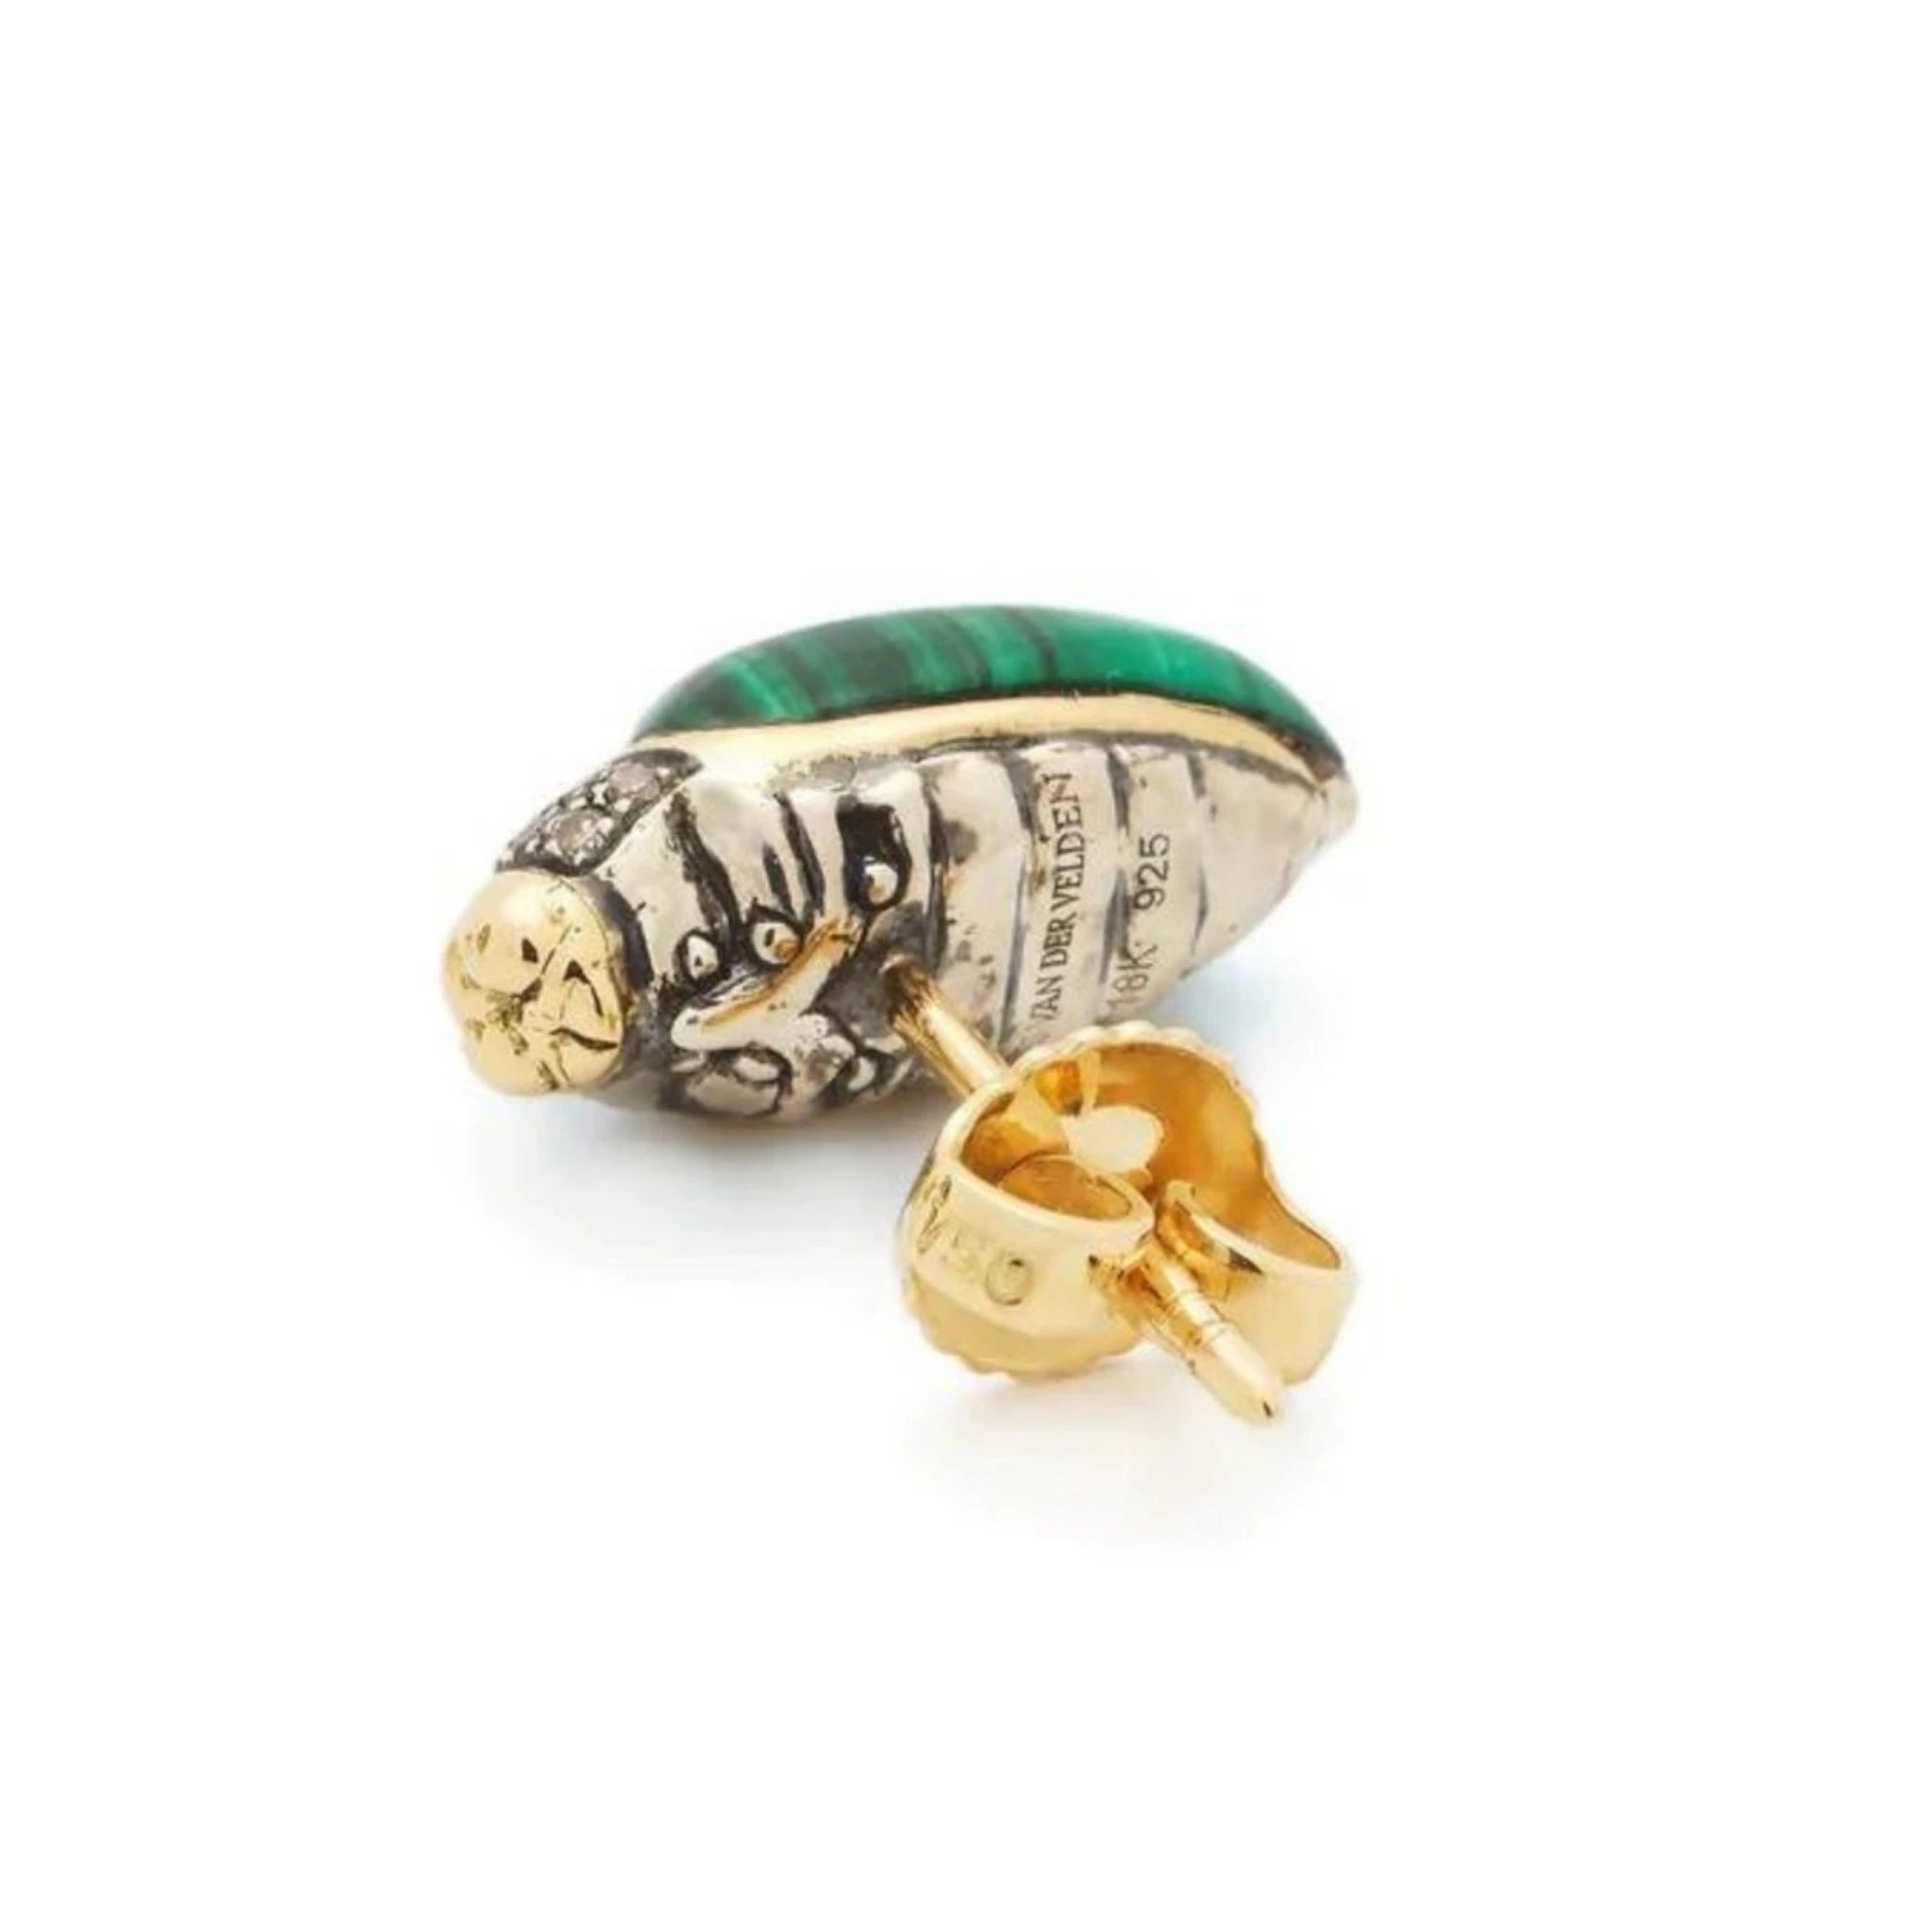 Bibi van der Velden, Mini Scarab Malachite Stud. Crafted in 18K yellow gold sterling silver with the body of the scarab carved from malachite stone and embellished with brown diamonds. Shown from the back view.